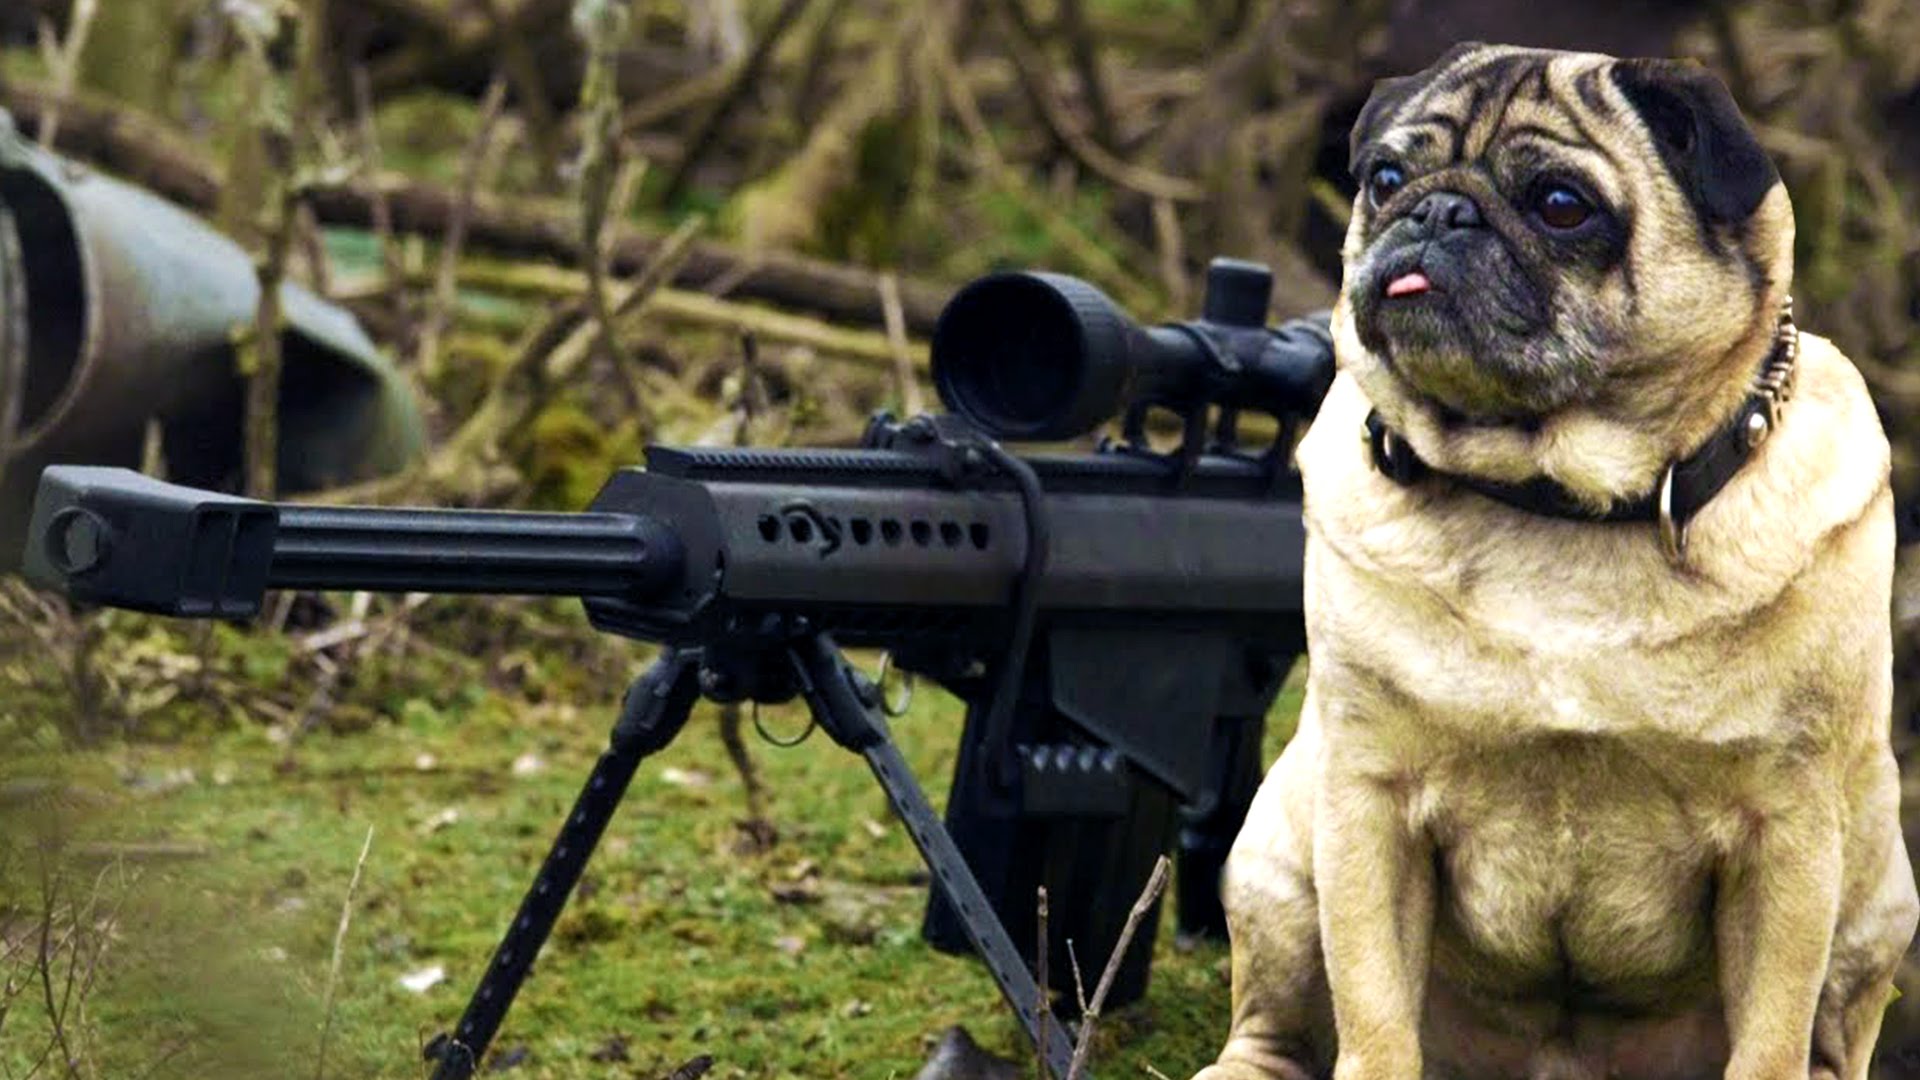 This Sniper Pug Is A Total Maverick. This Video Had Me